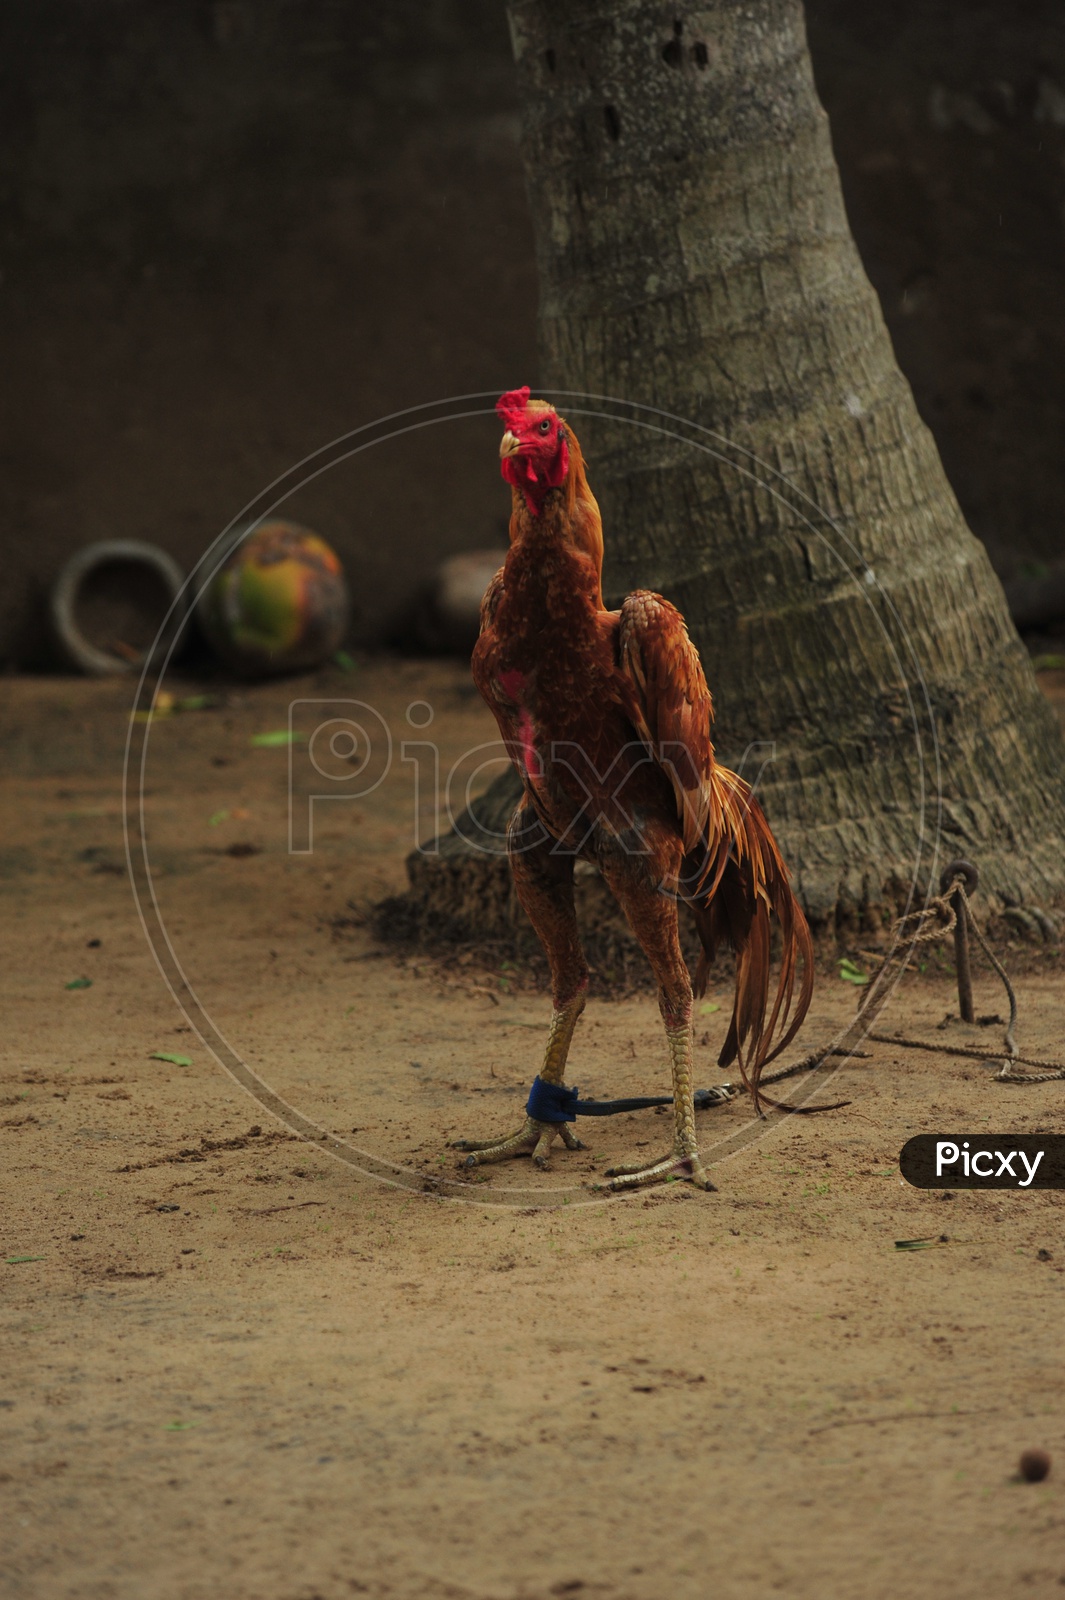 Cock Hen with its leg tied